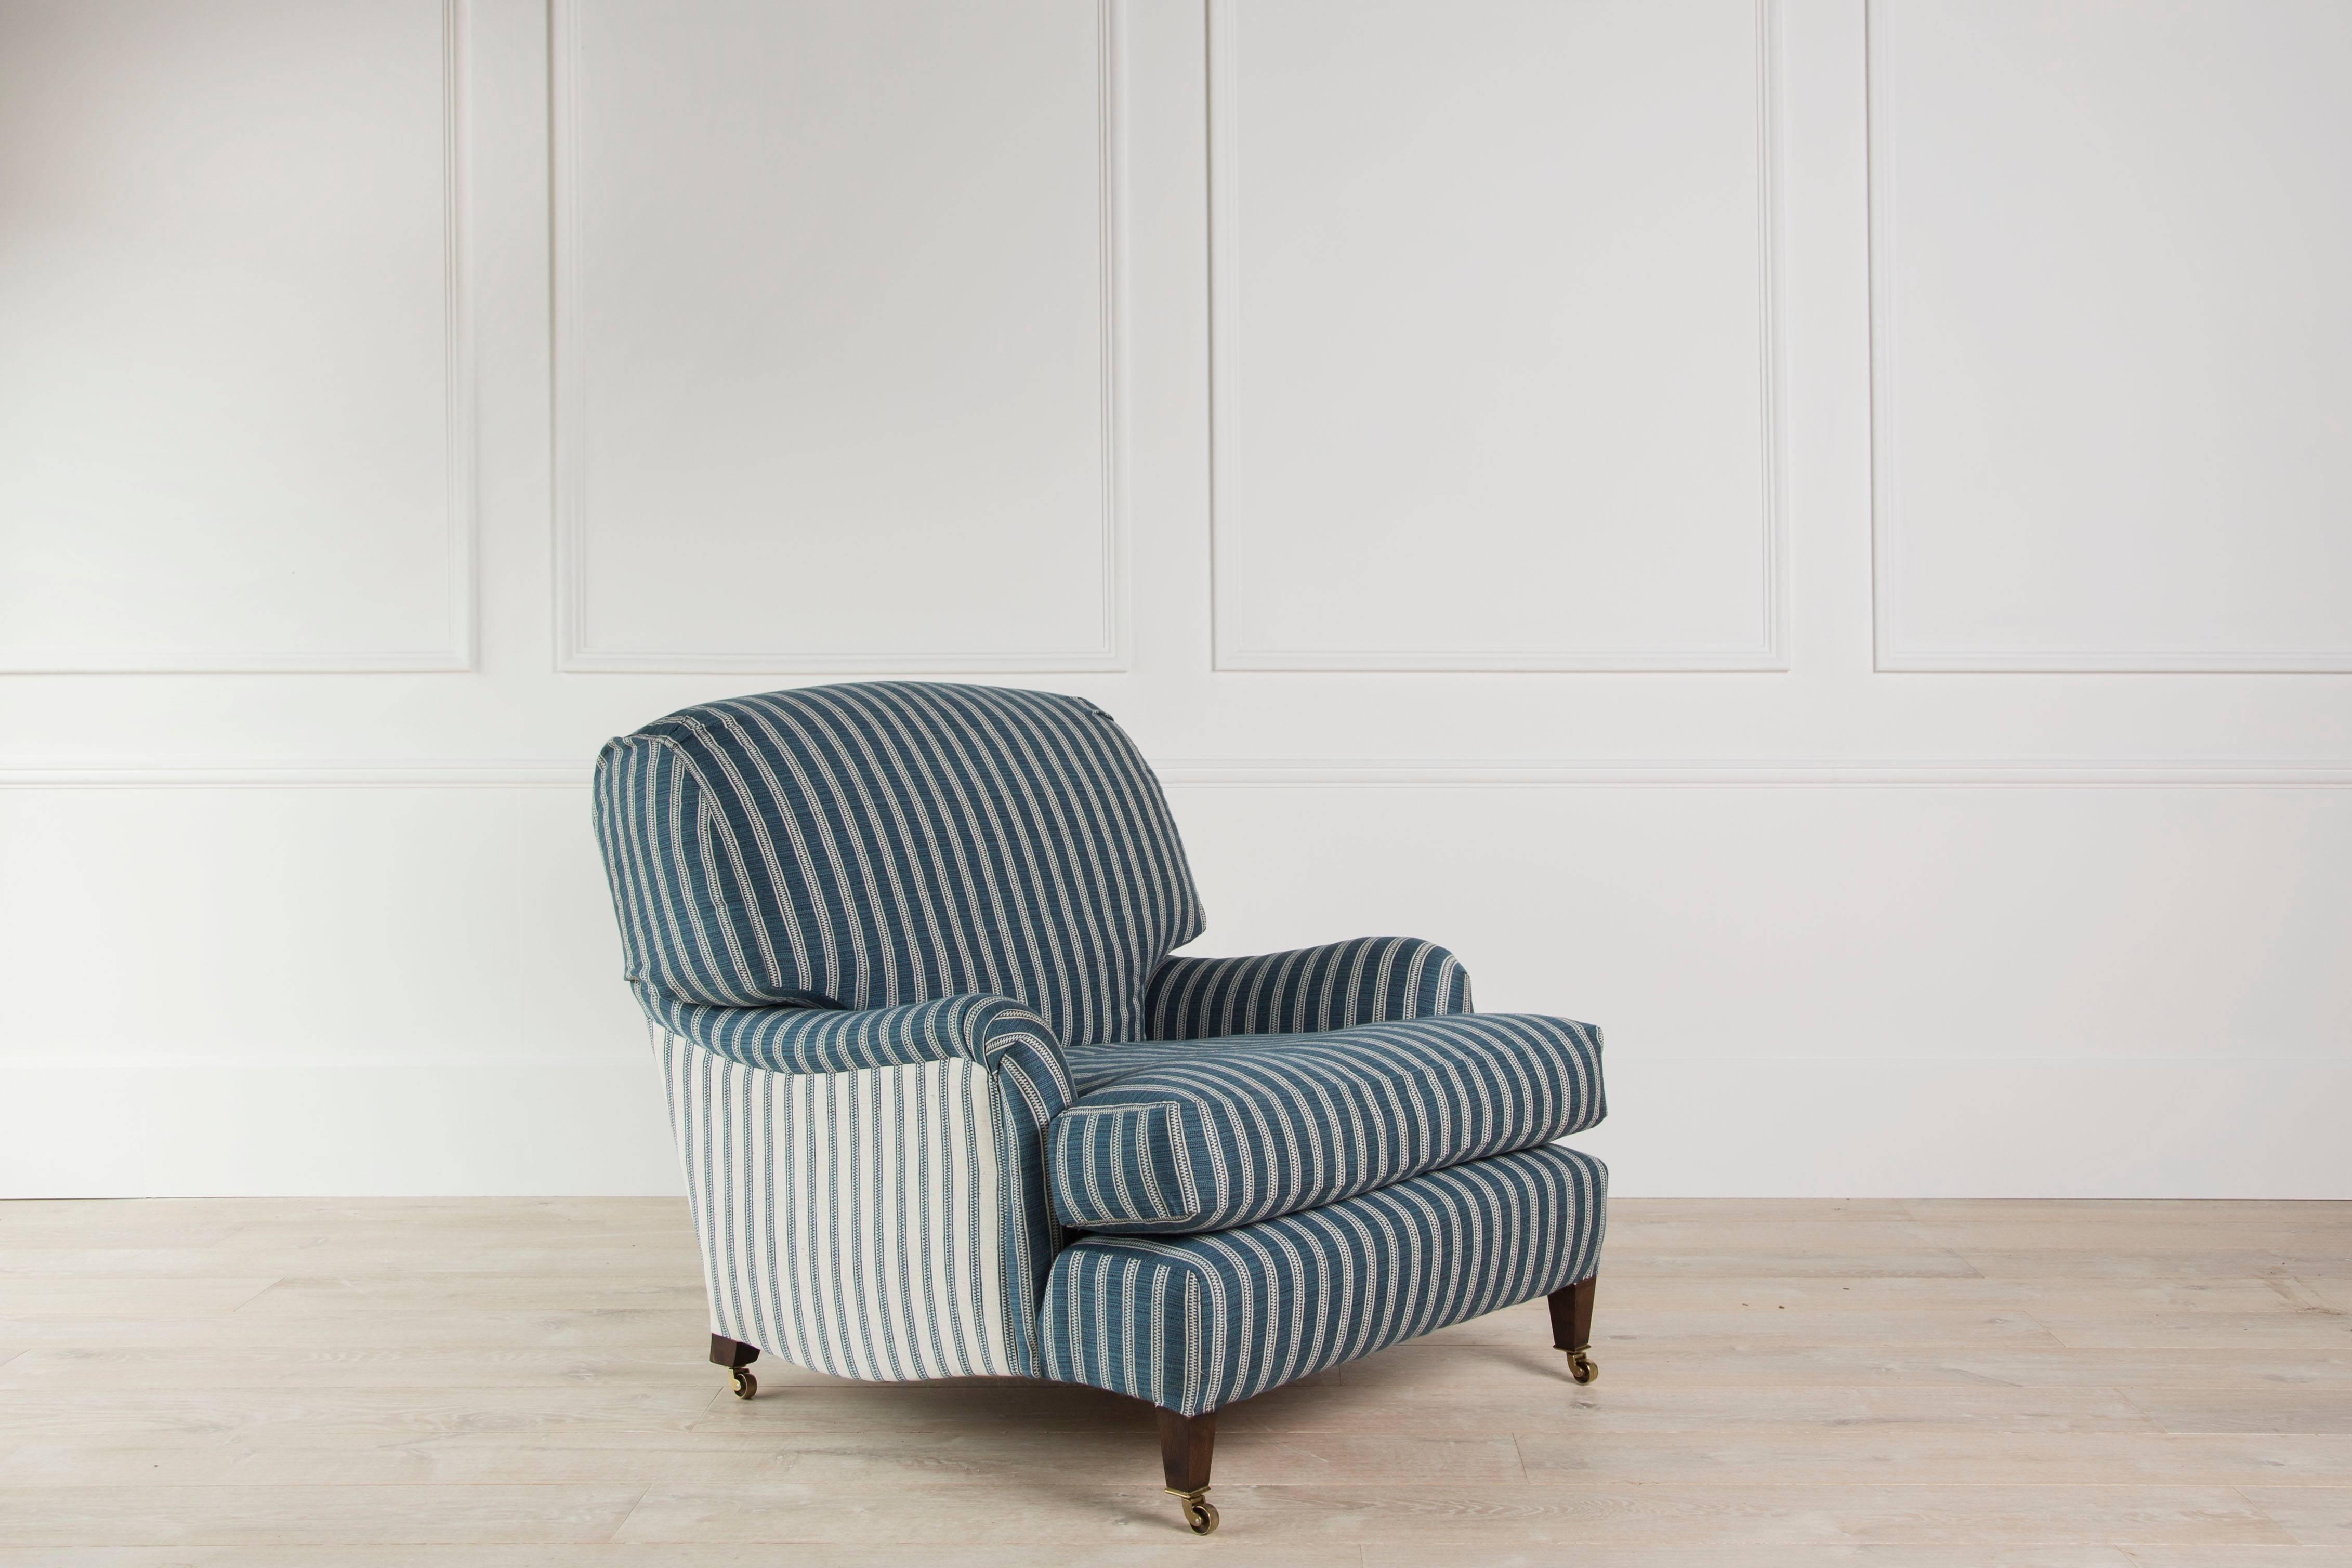 A supremely comfortable armchair, hand-built in our Gloucestershire workshop to the exact specification of the Howard & Sons ‘Ivor’ model.

The Kingston Armchair is made from a hardwood frame using beech, with a hand-tied coil spring seat (the